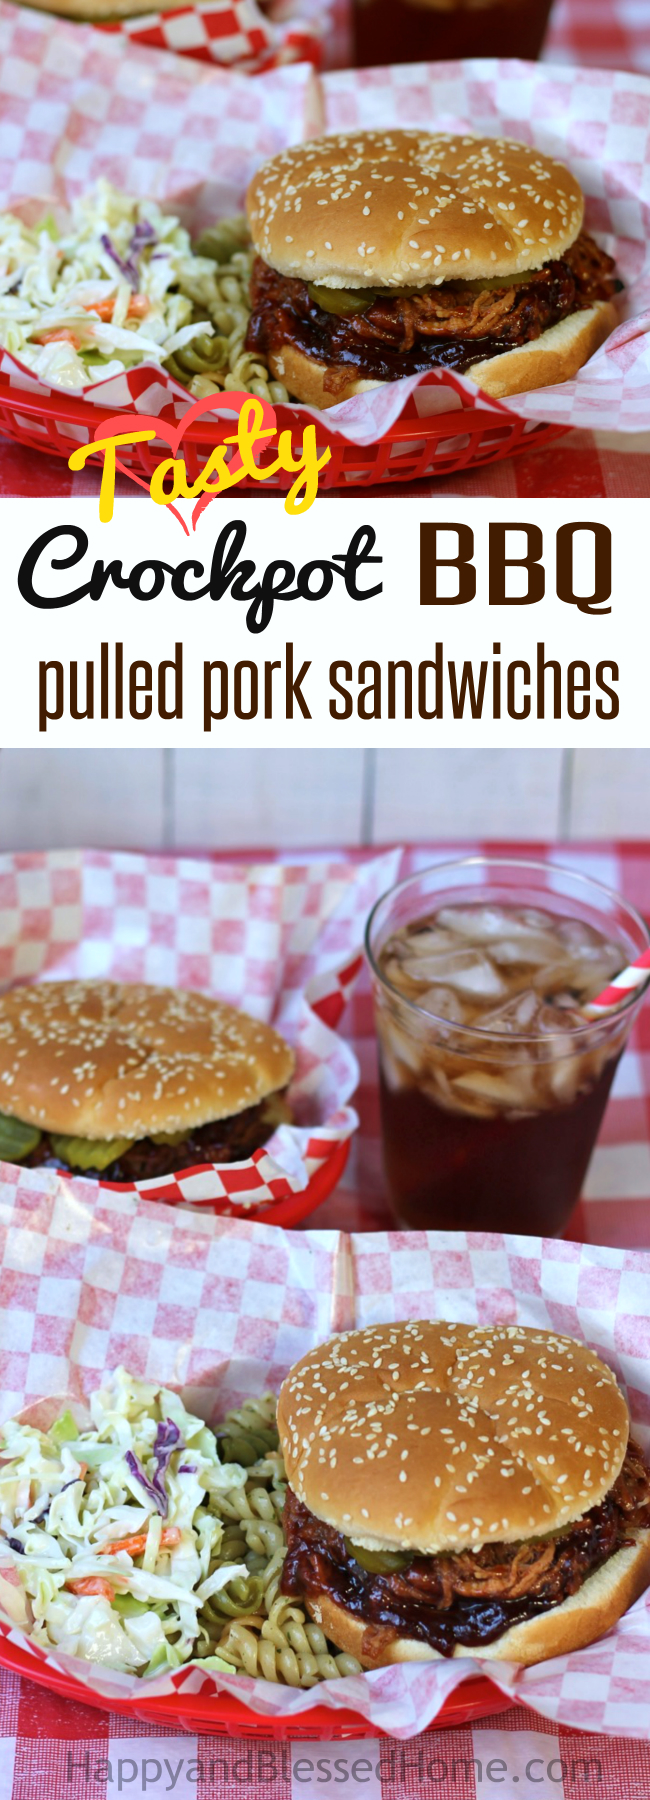 Tasty Crockpot BBQ pulled pork Sandwiches - an easy recipe from HappyandBlessedHome.com